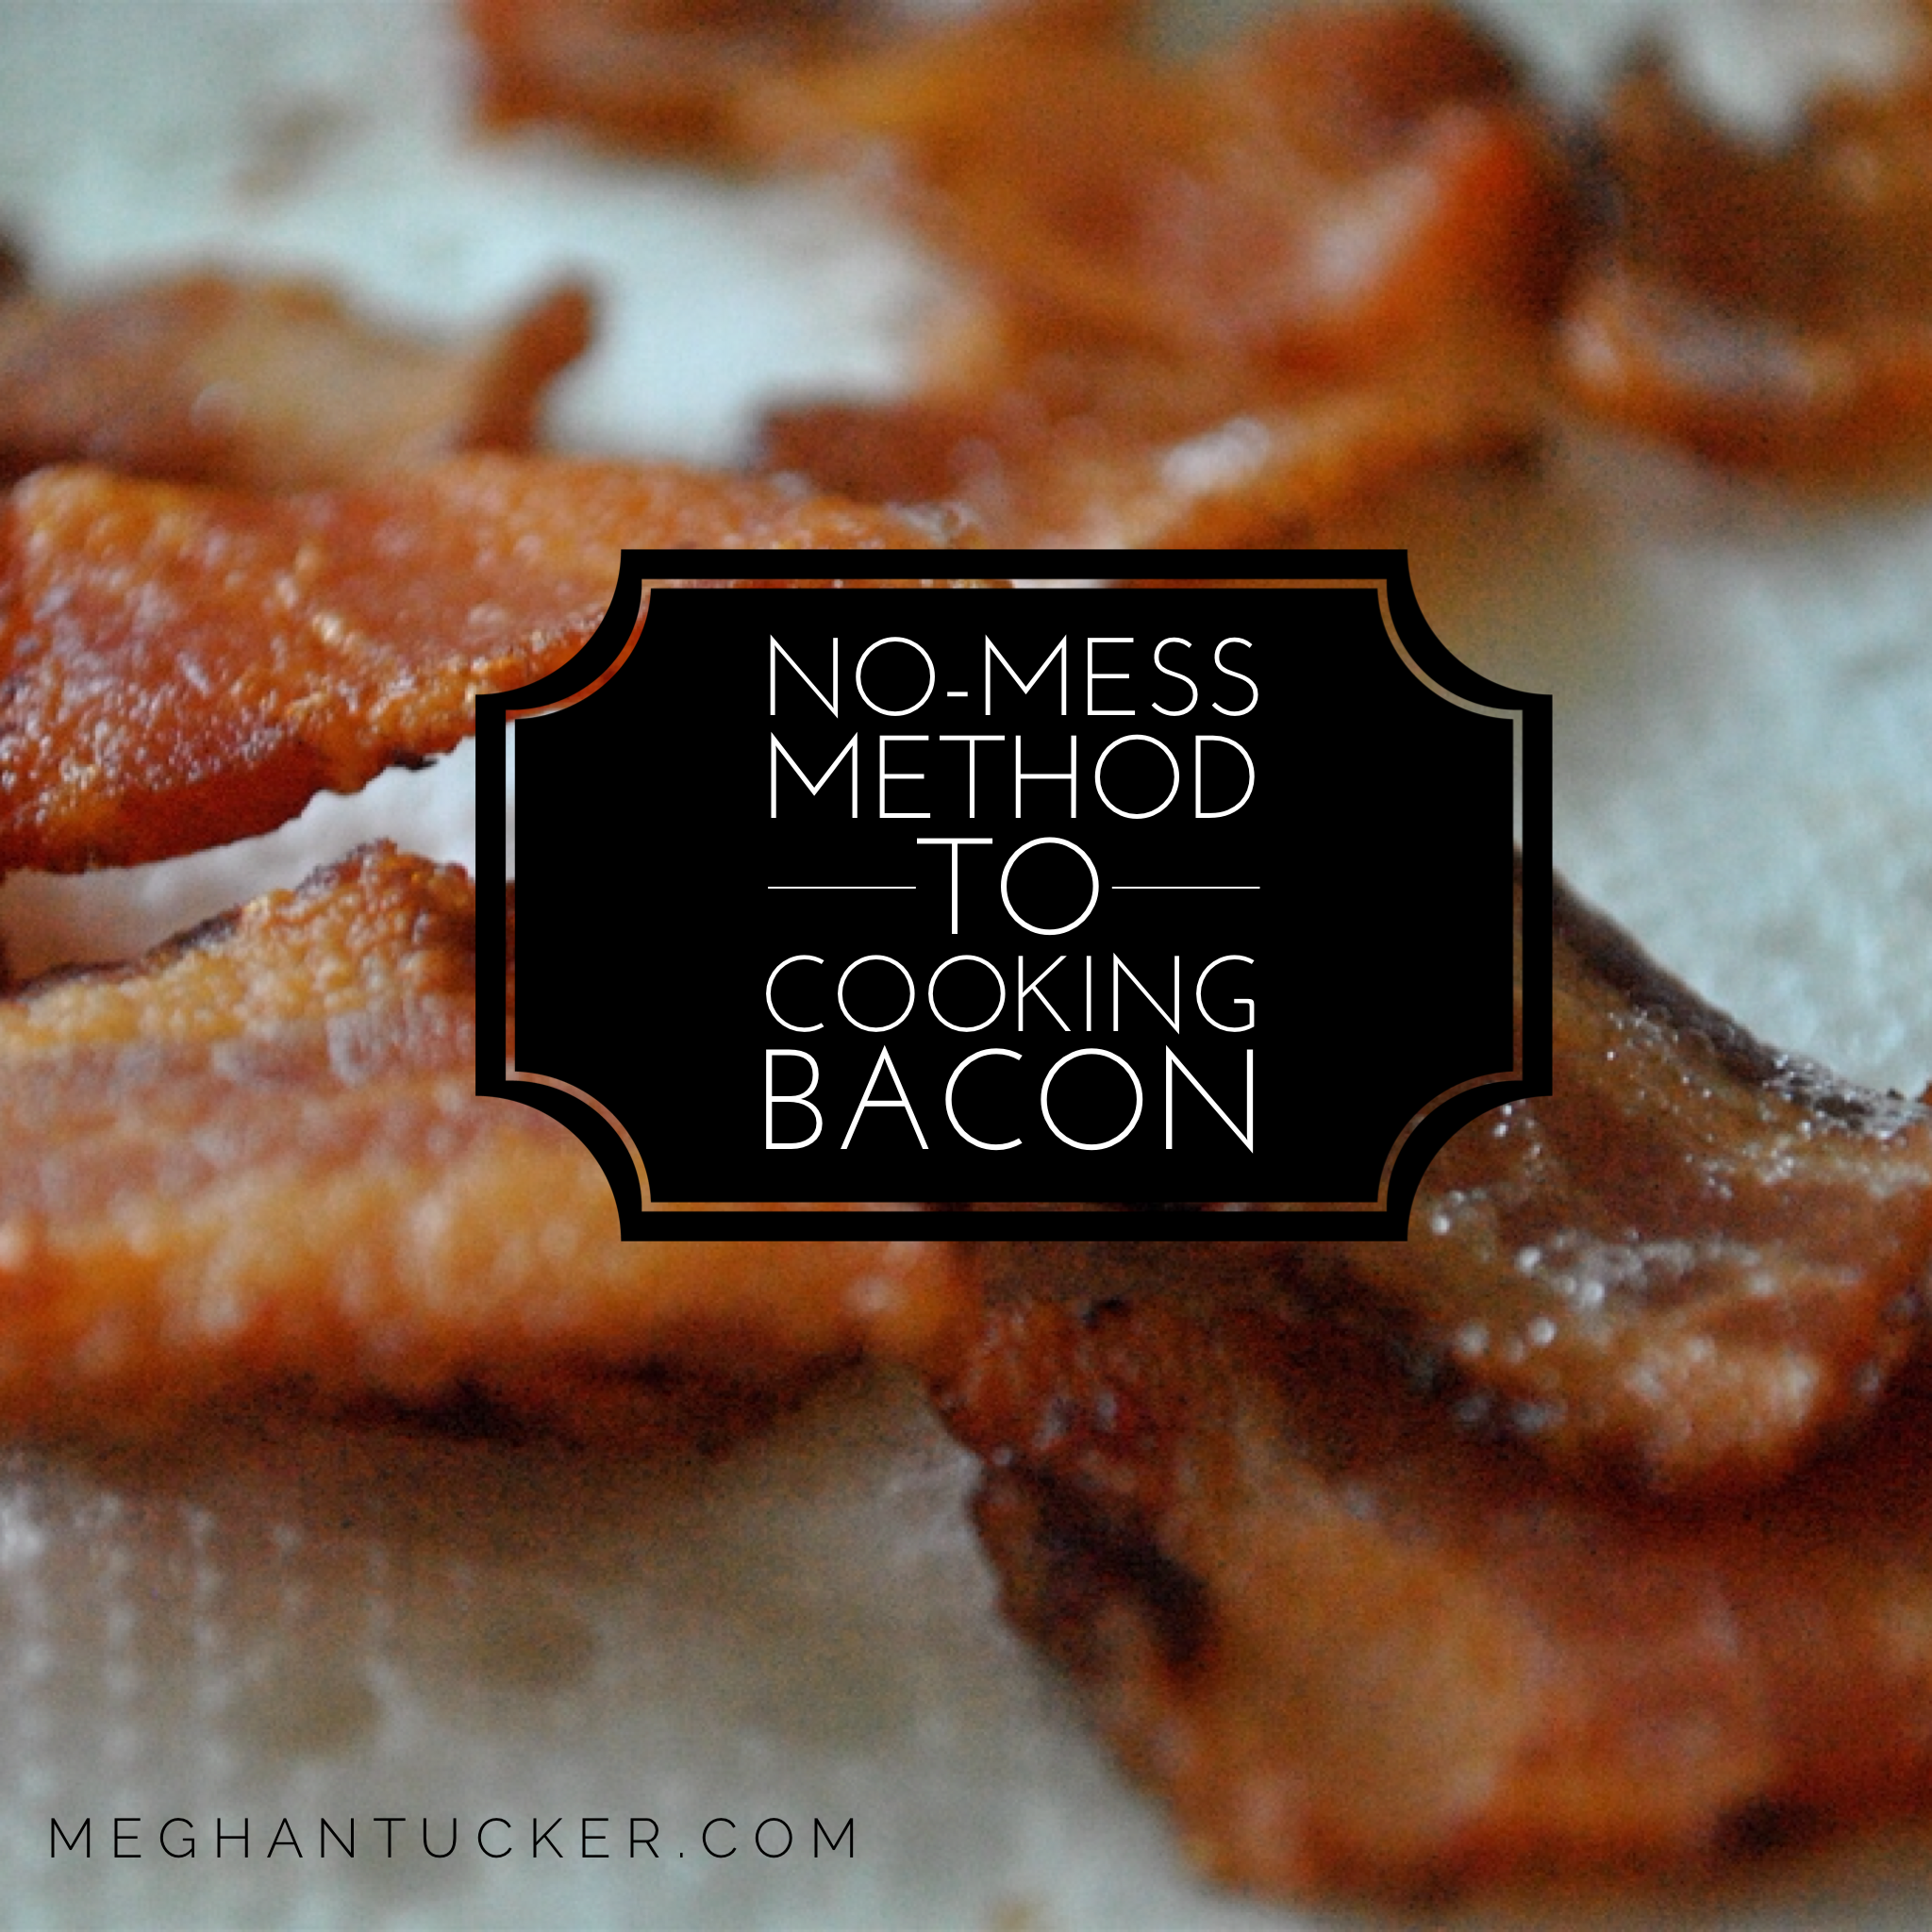 The No Mess Method to Cooking Bacon